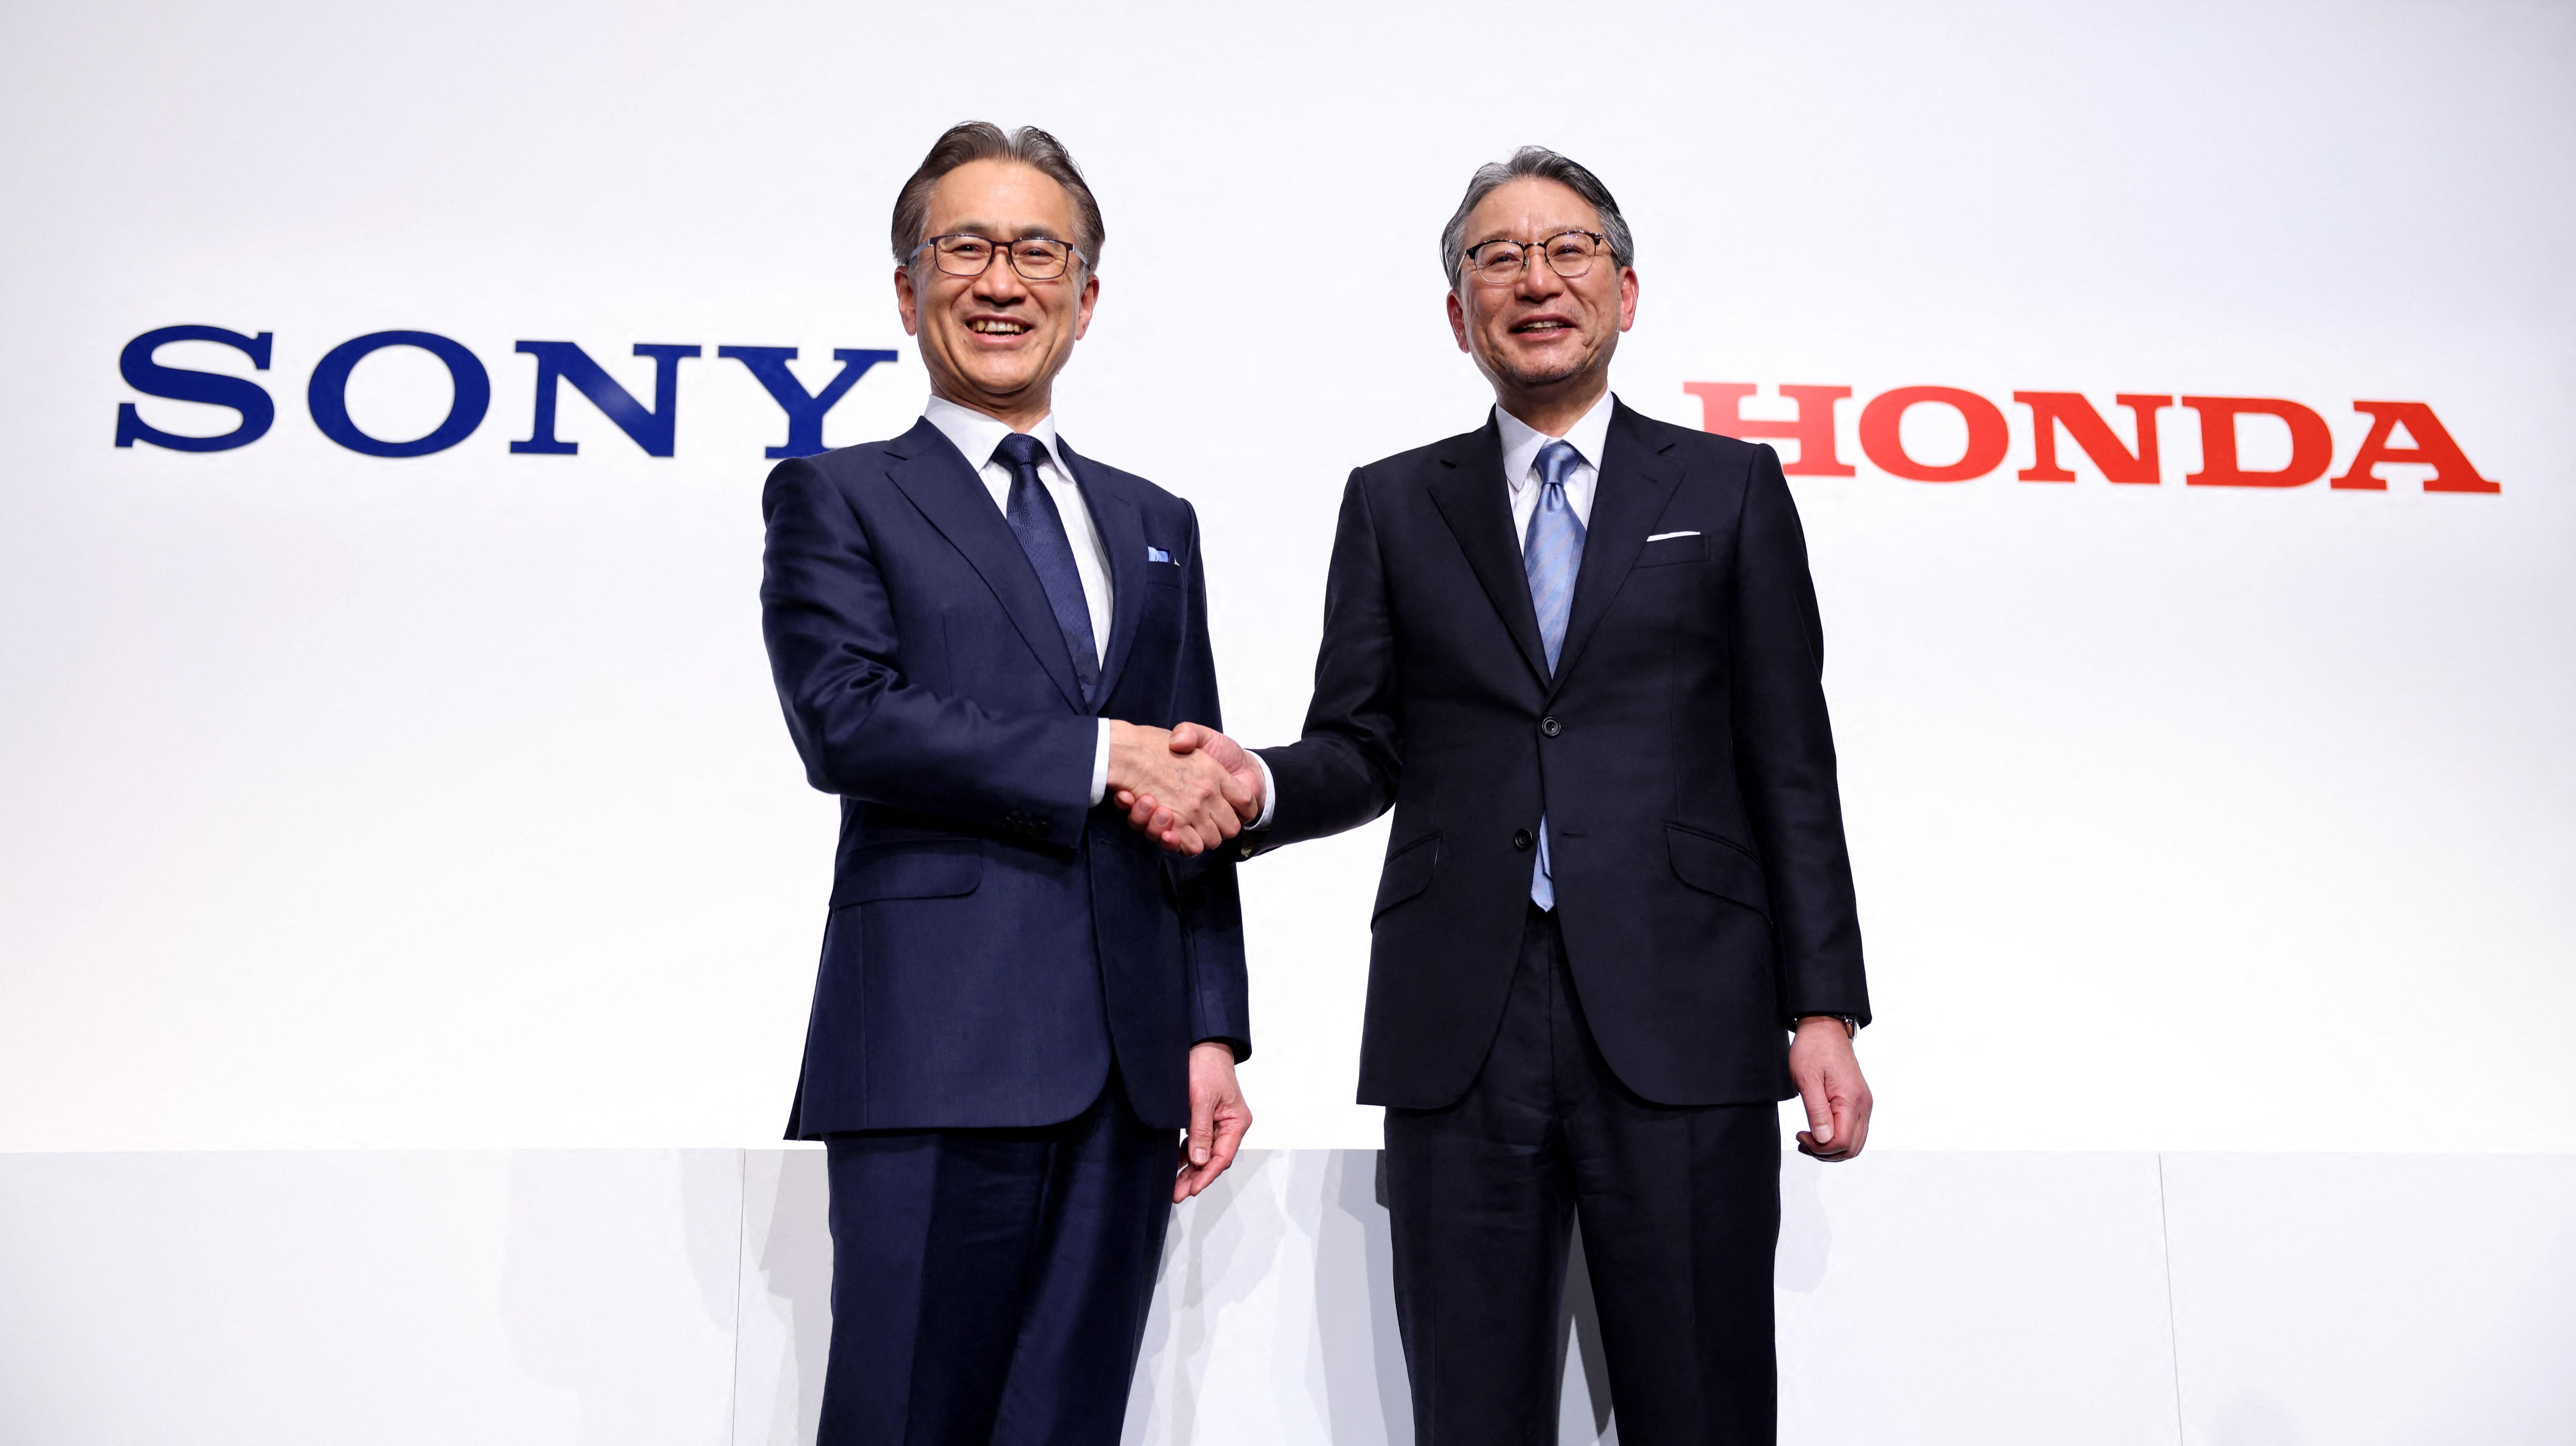 Honda And Sony Partner Up To Make An Electric Car And An EV Company To Boot